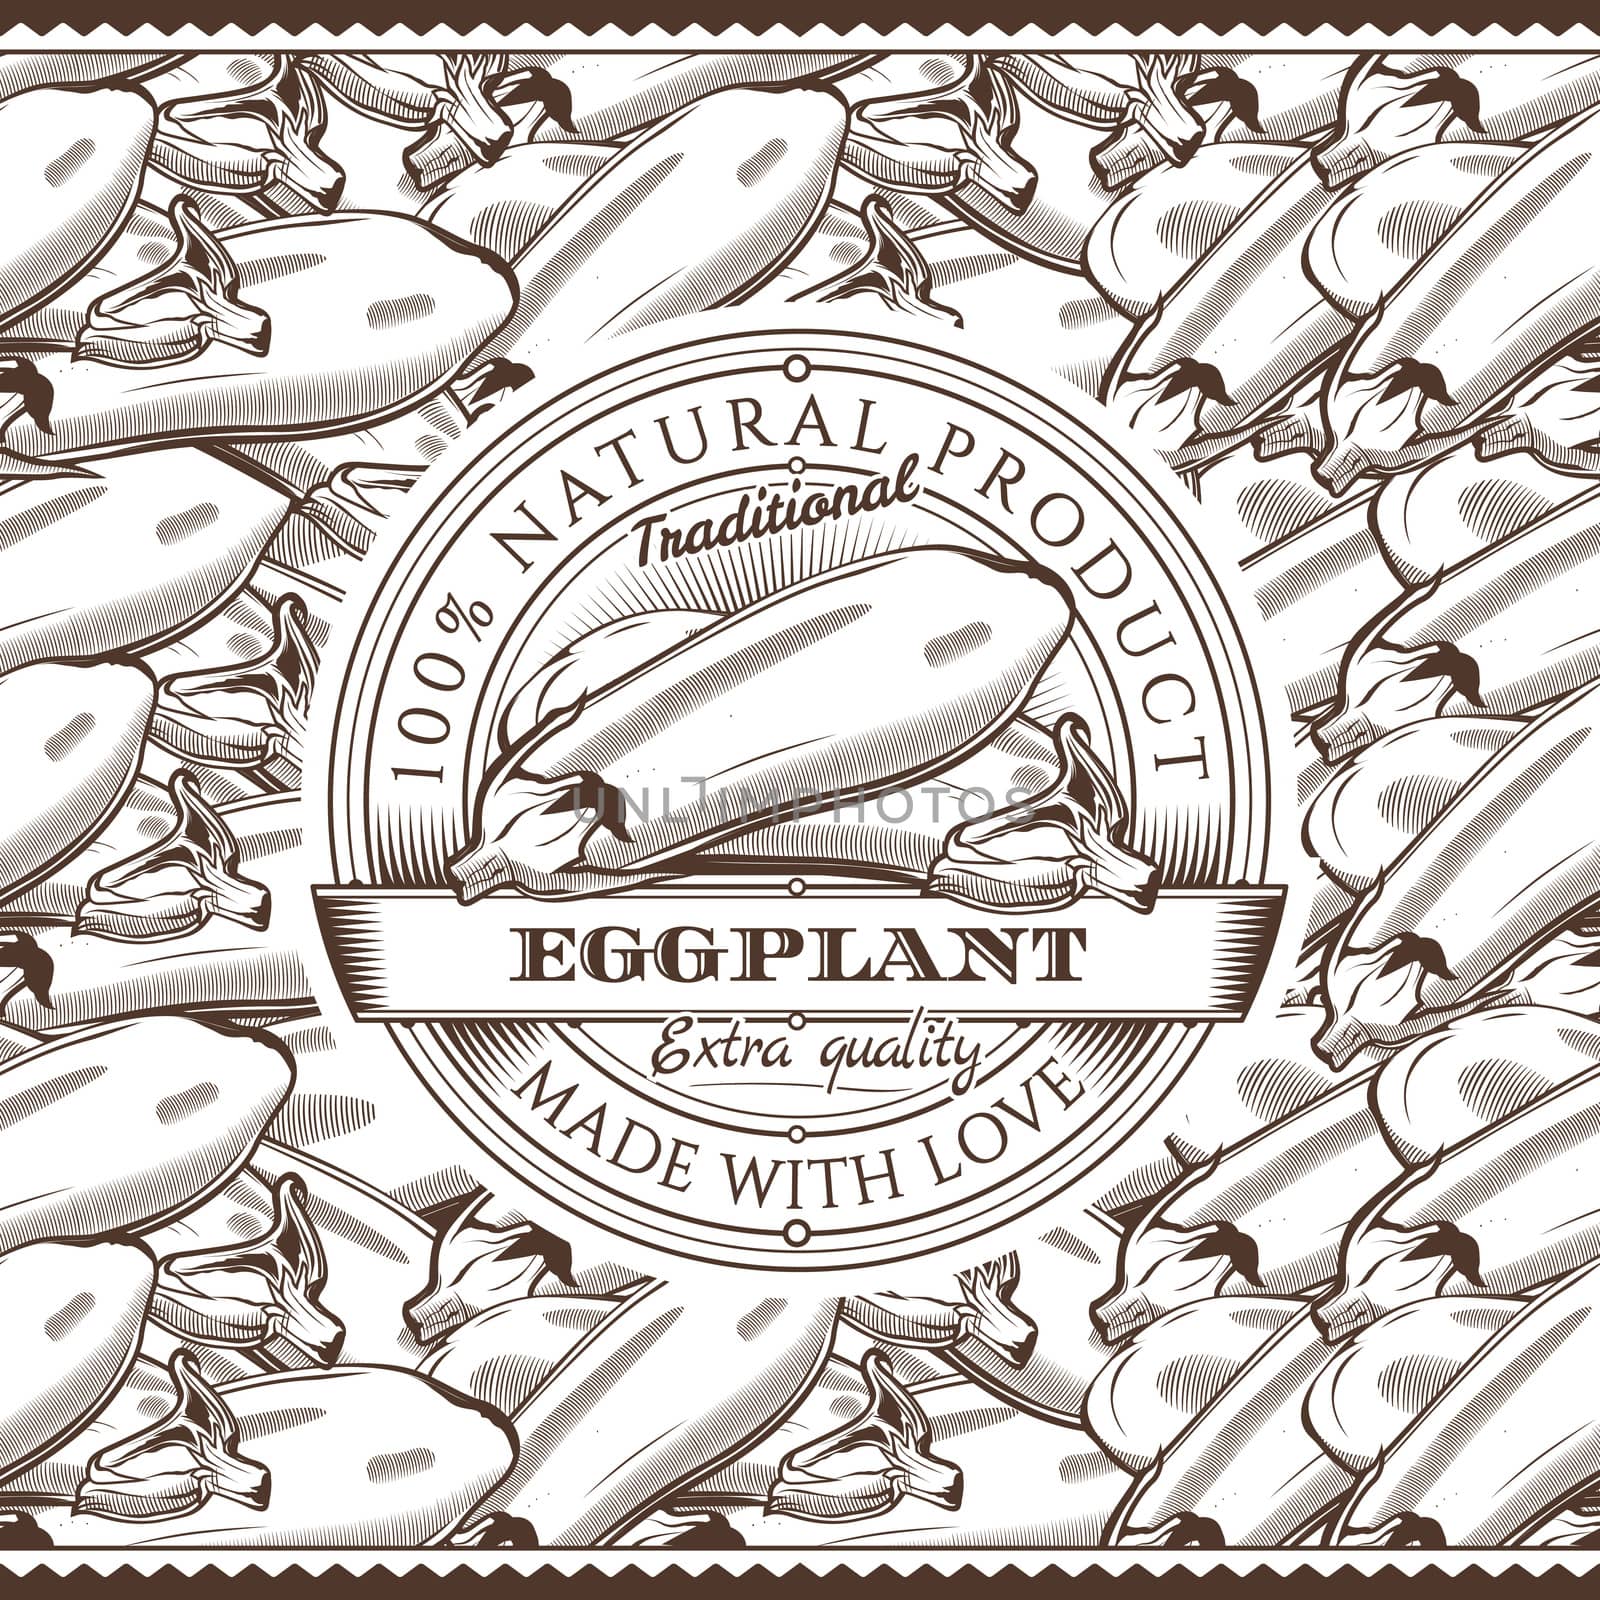 Label on seamless pattern in vintage style.